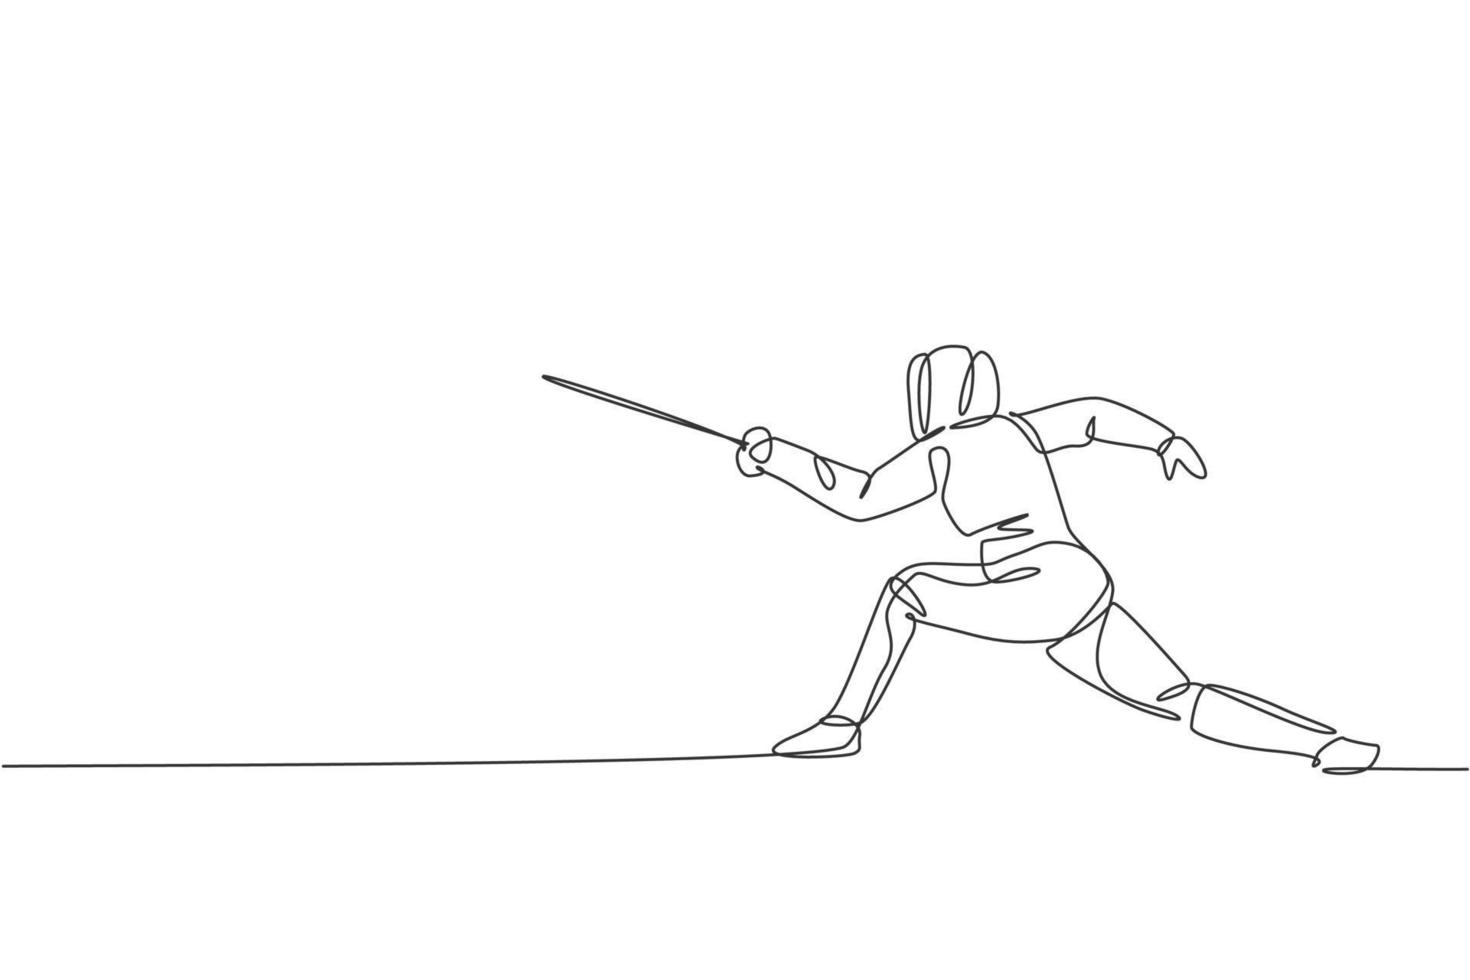 Single continuous line drawing young professional fencer athlete man in fencing mask and rapier. Competitive fighting sport competition concept. Trendy one line draw design graphic vector illustration